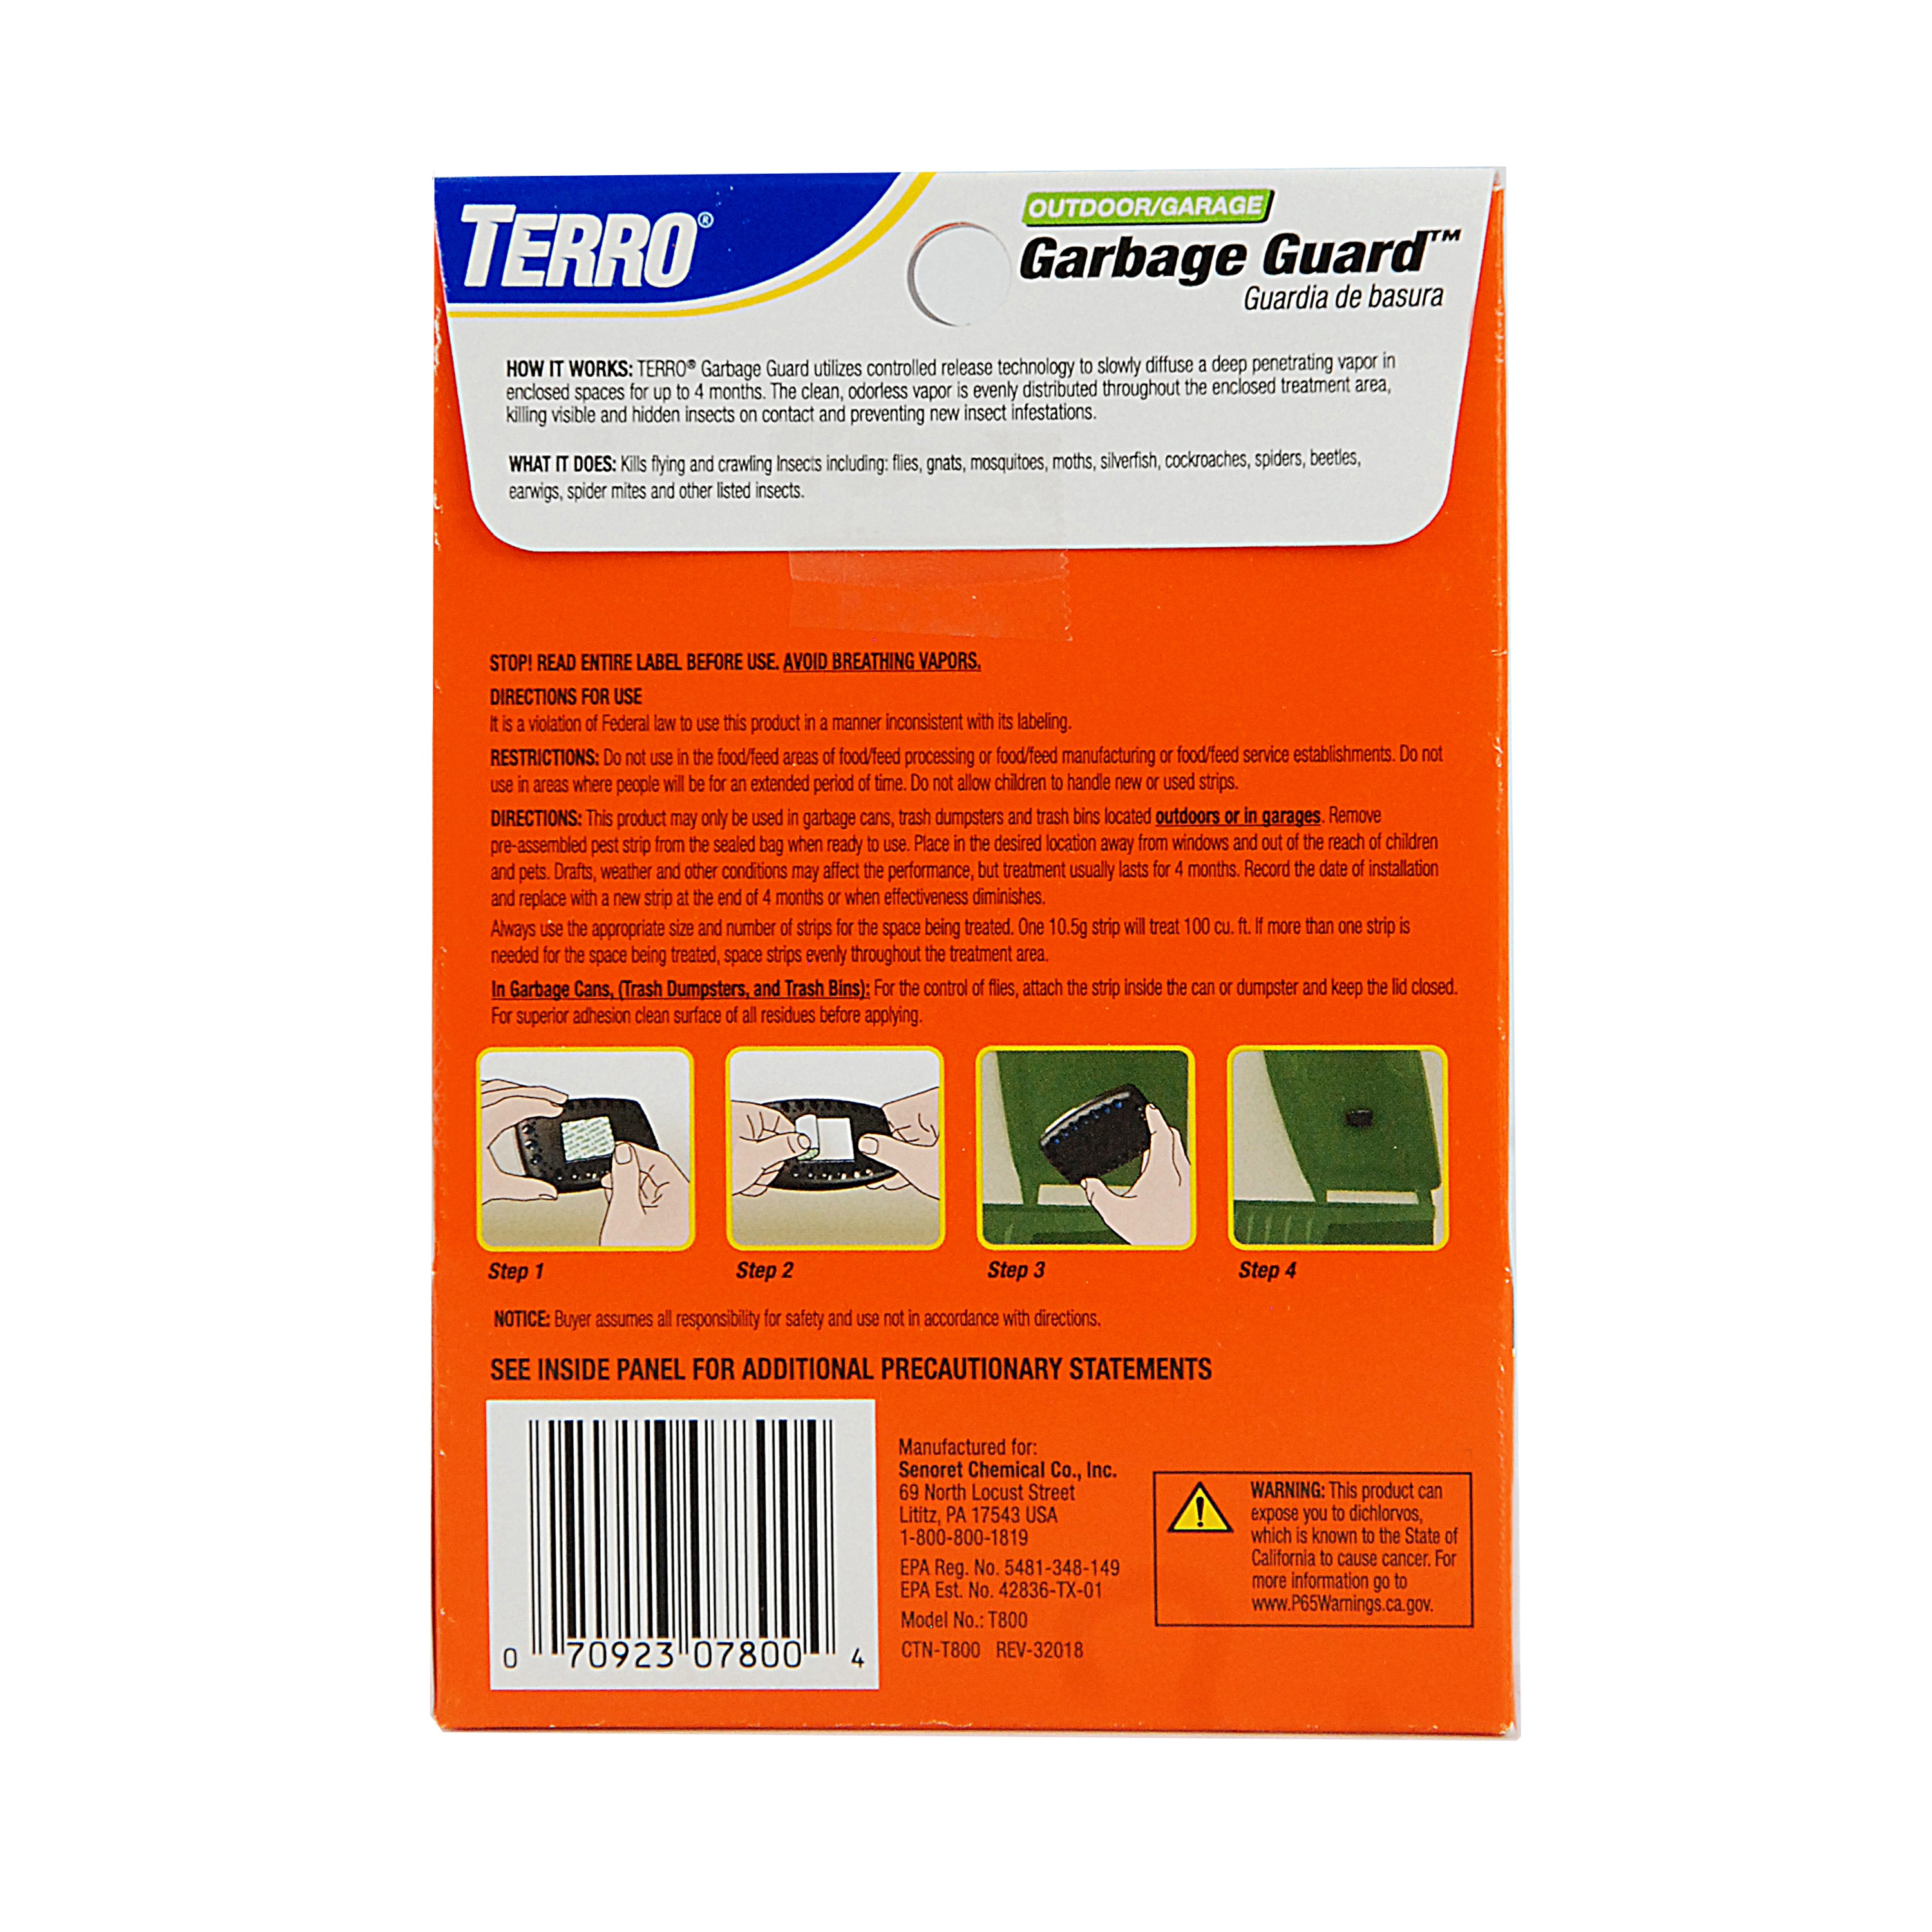 Stout Pest Guard 2.00 mil Insect Repellent Trash Bags 55 Gallons 37 x 52  Black Box Of 65 - Office Depot